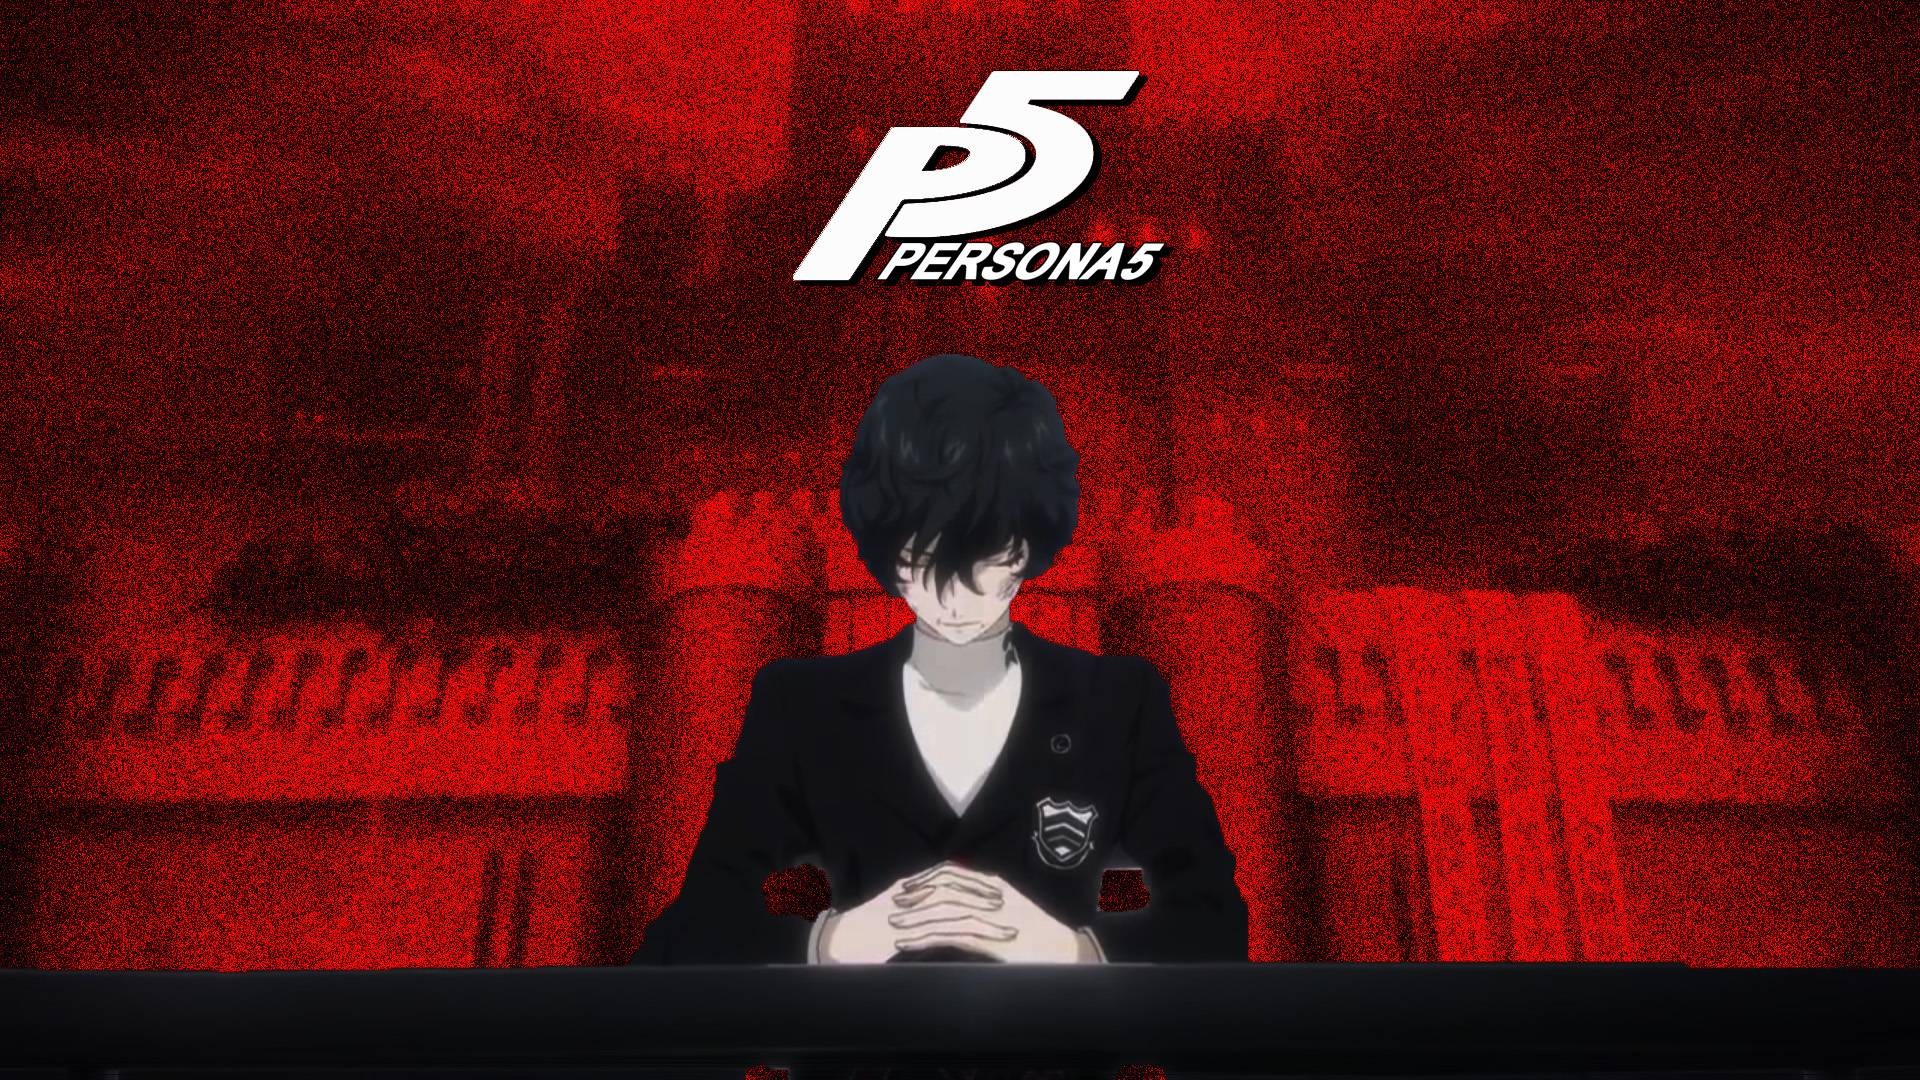 Anime 1920x1080 Persona series Persona 5 video games red background anime games anime